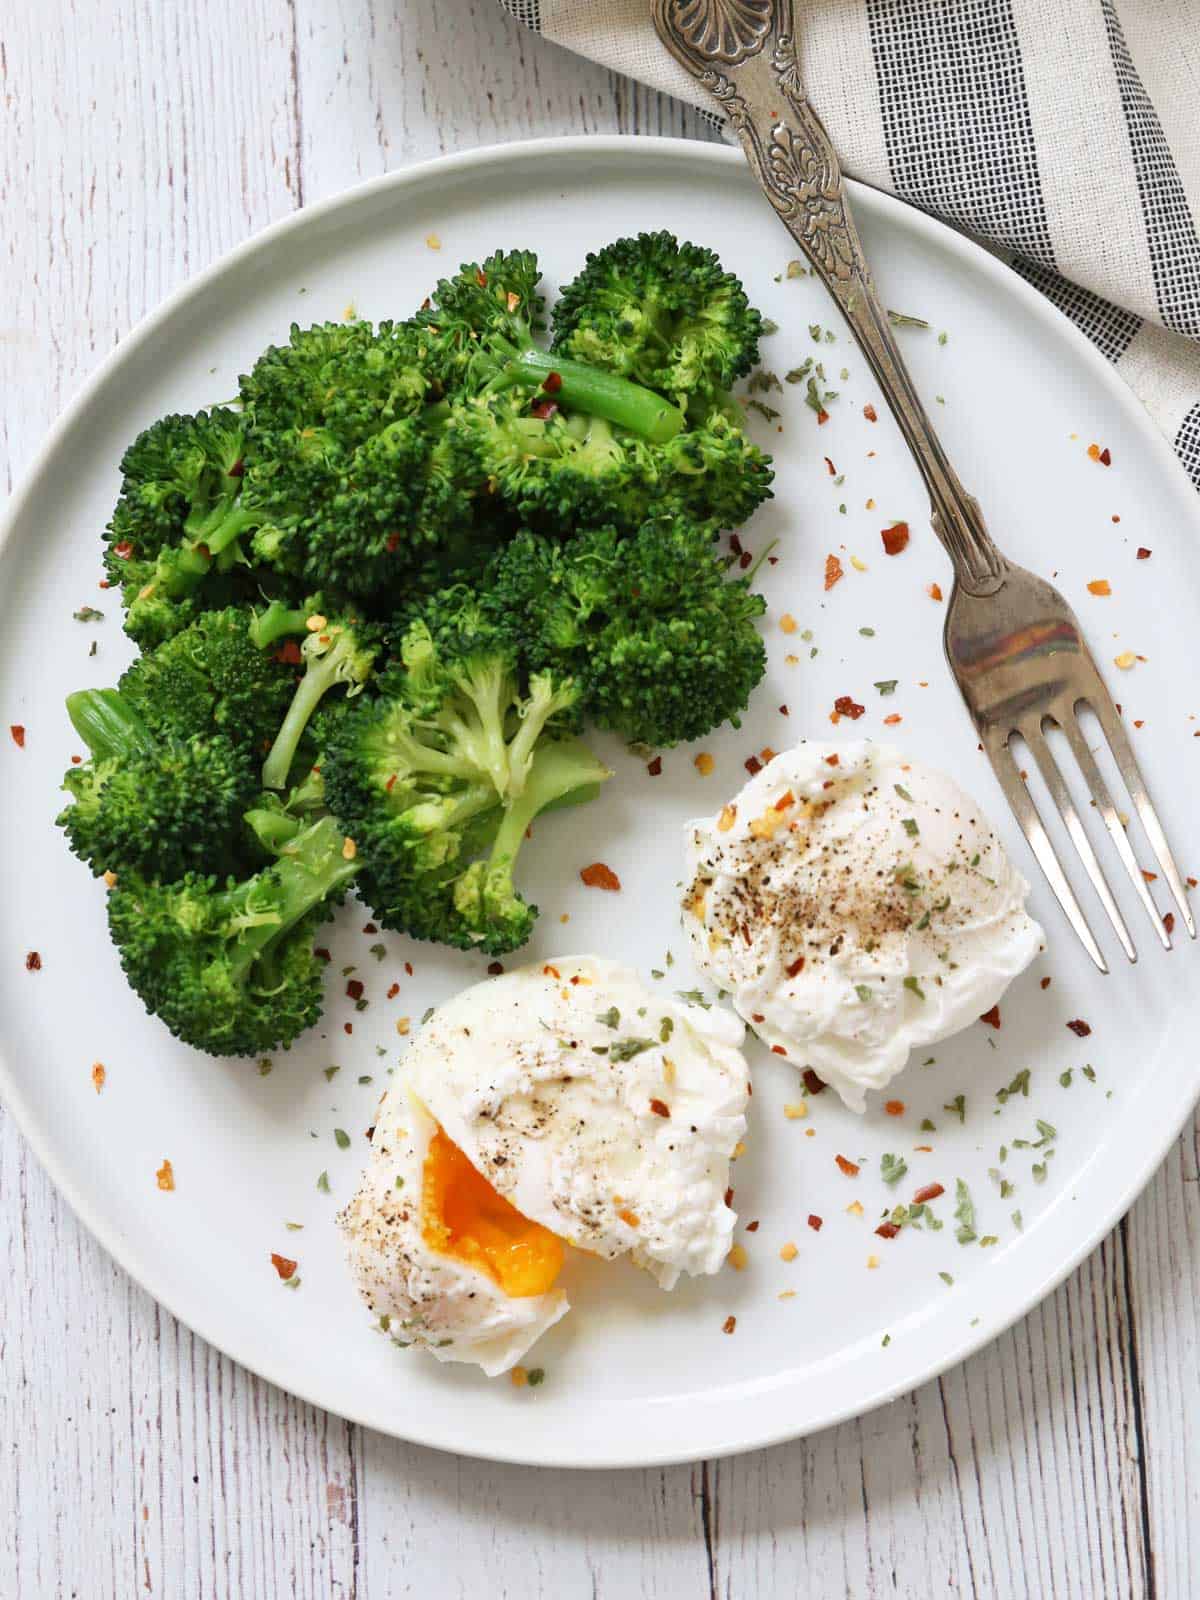 Microwave broccoli and two poached eggs on a plate with a fork.